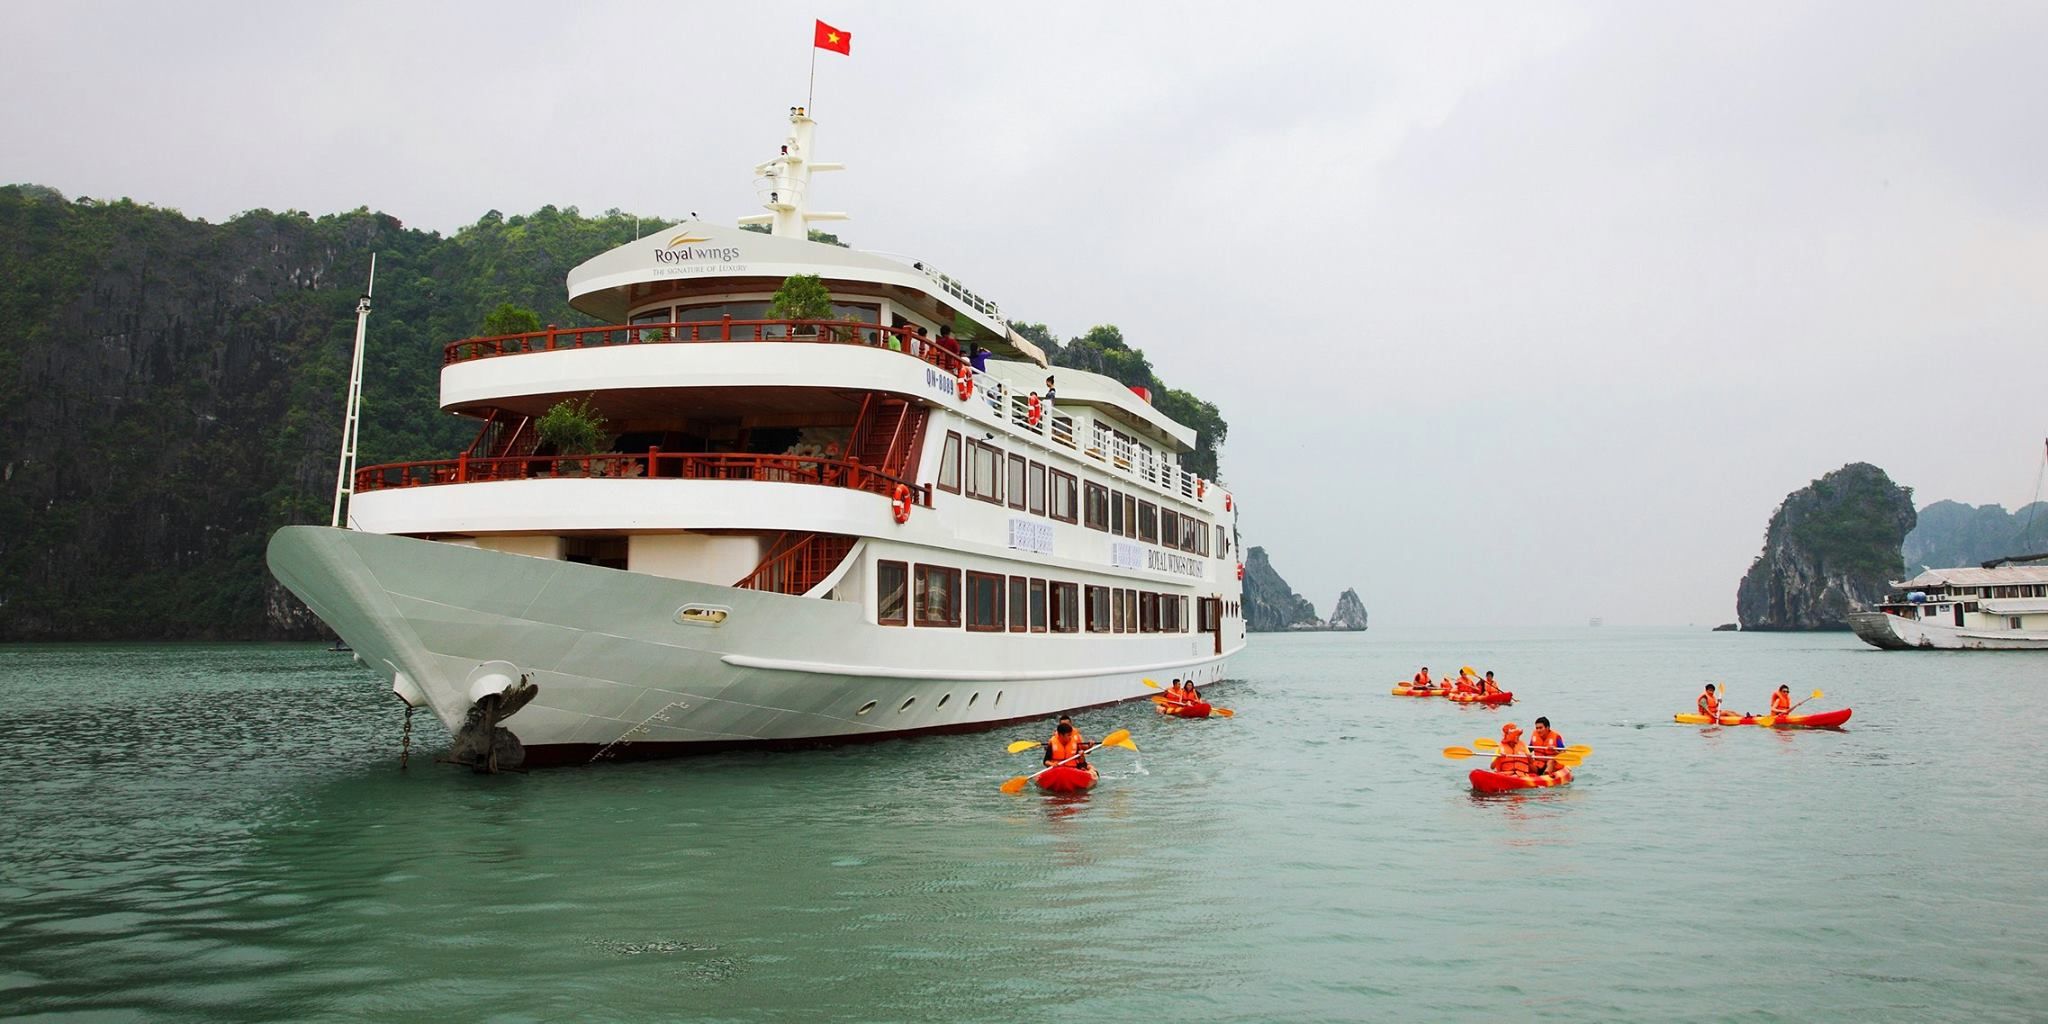 Our insiders guide to Halong Bay cruises features the most breathtaking views, luxurious accommodations, and hidden gems.